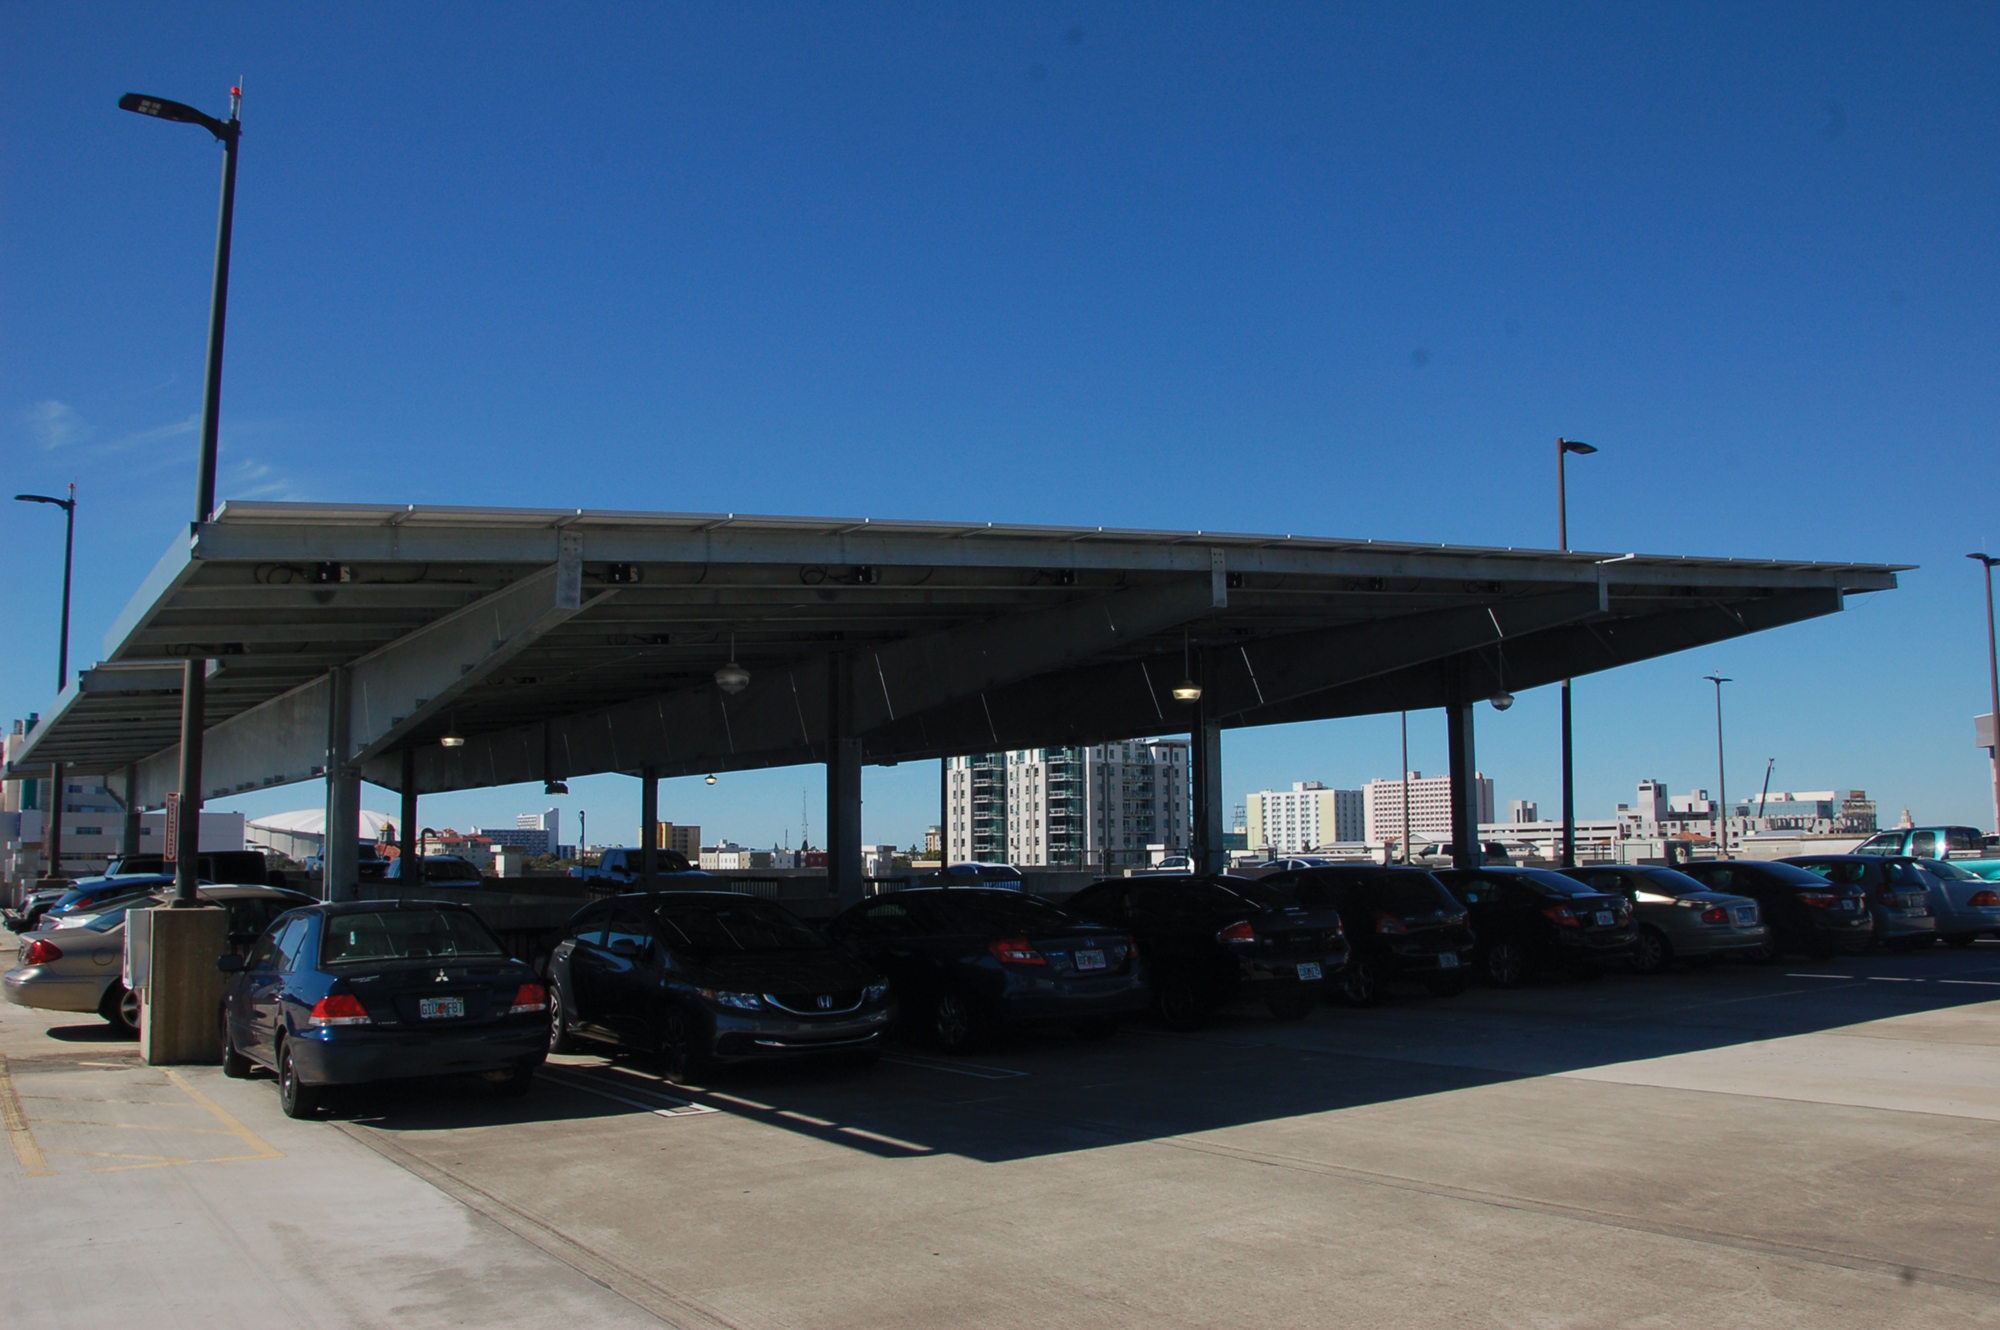 Solar Power: The installation of of new solar car ports, like the ones shown above from the parking garage, will be the first project to contribute to the Green Revolving Fund. Delaney Brown | The Crow's Nest